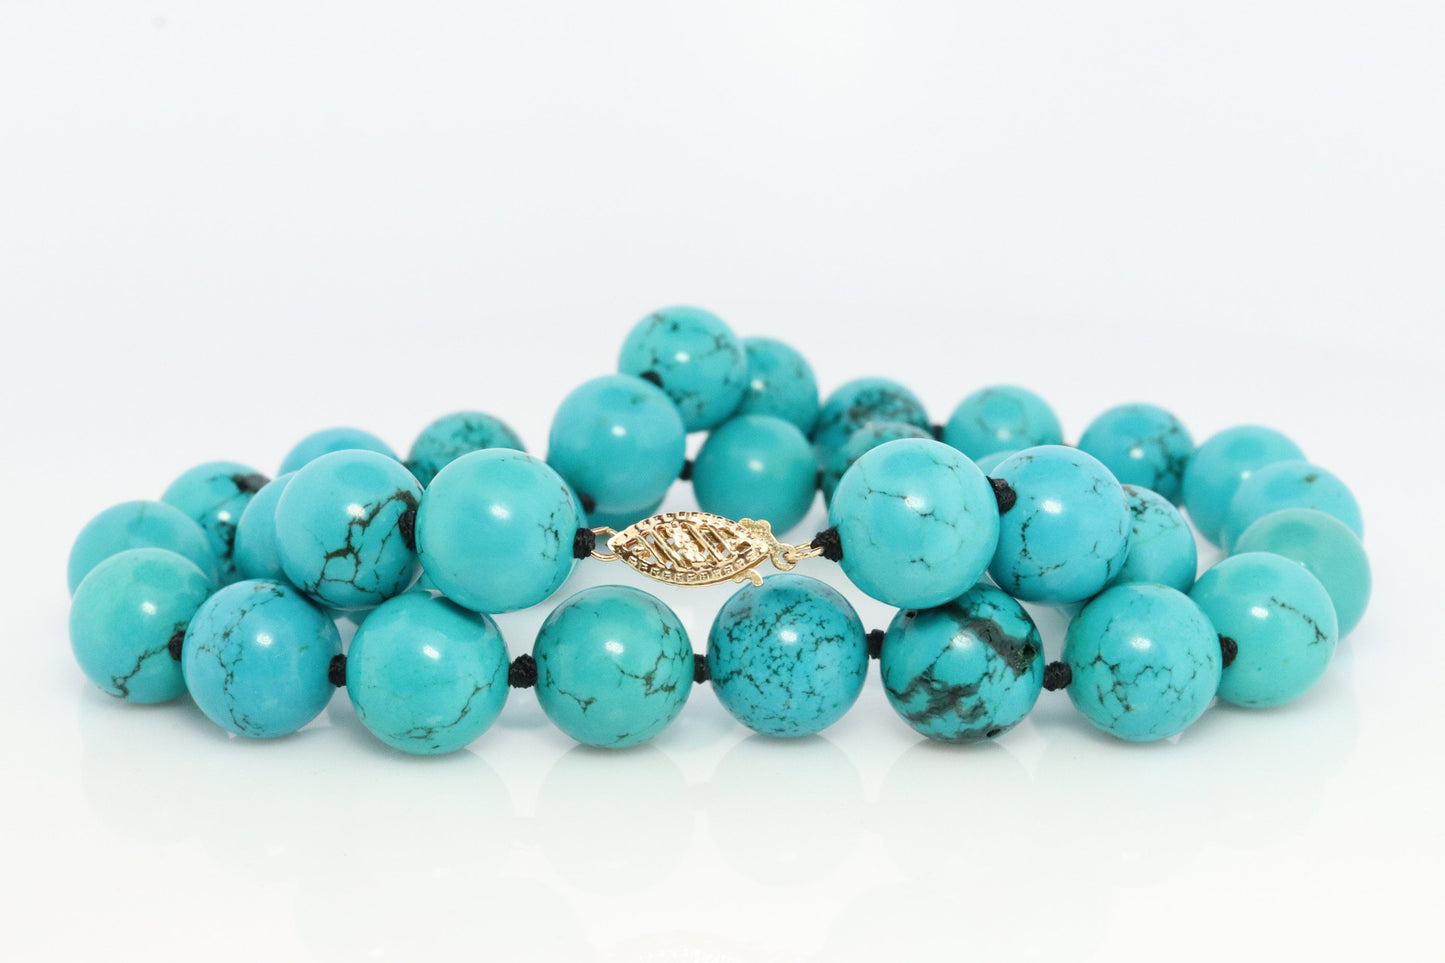 14k Genuine Turquoise Bead Necklace. Round Turquoise Knotted Beads Necklace. 18in